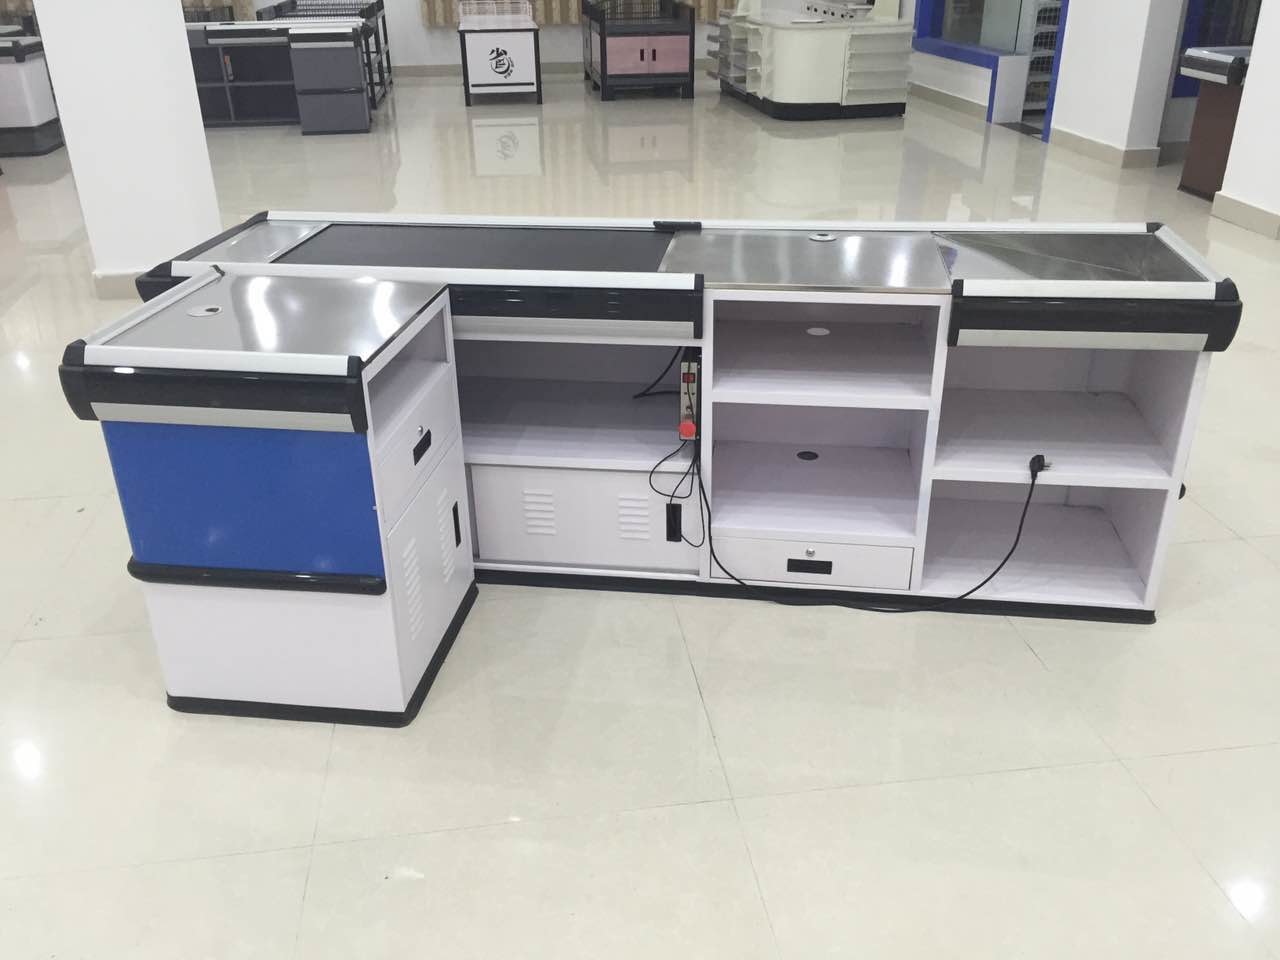  Full Metal Supermarket Conveyor Belt Checkout Counter Cashier Currency Desk Checkout Counter Manufactures